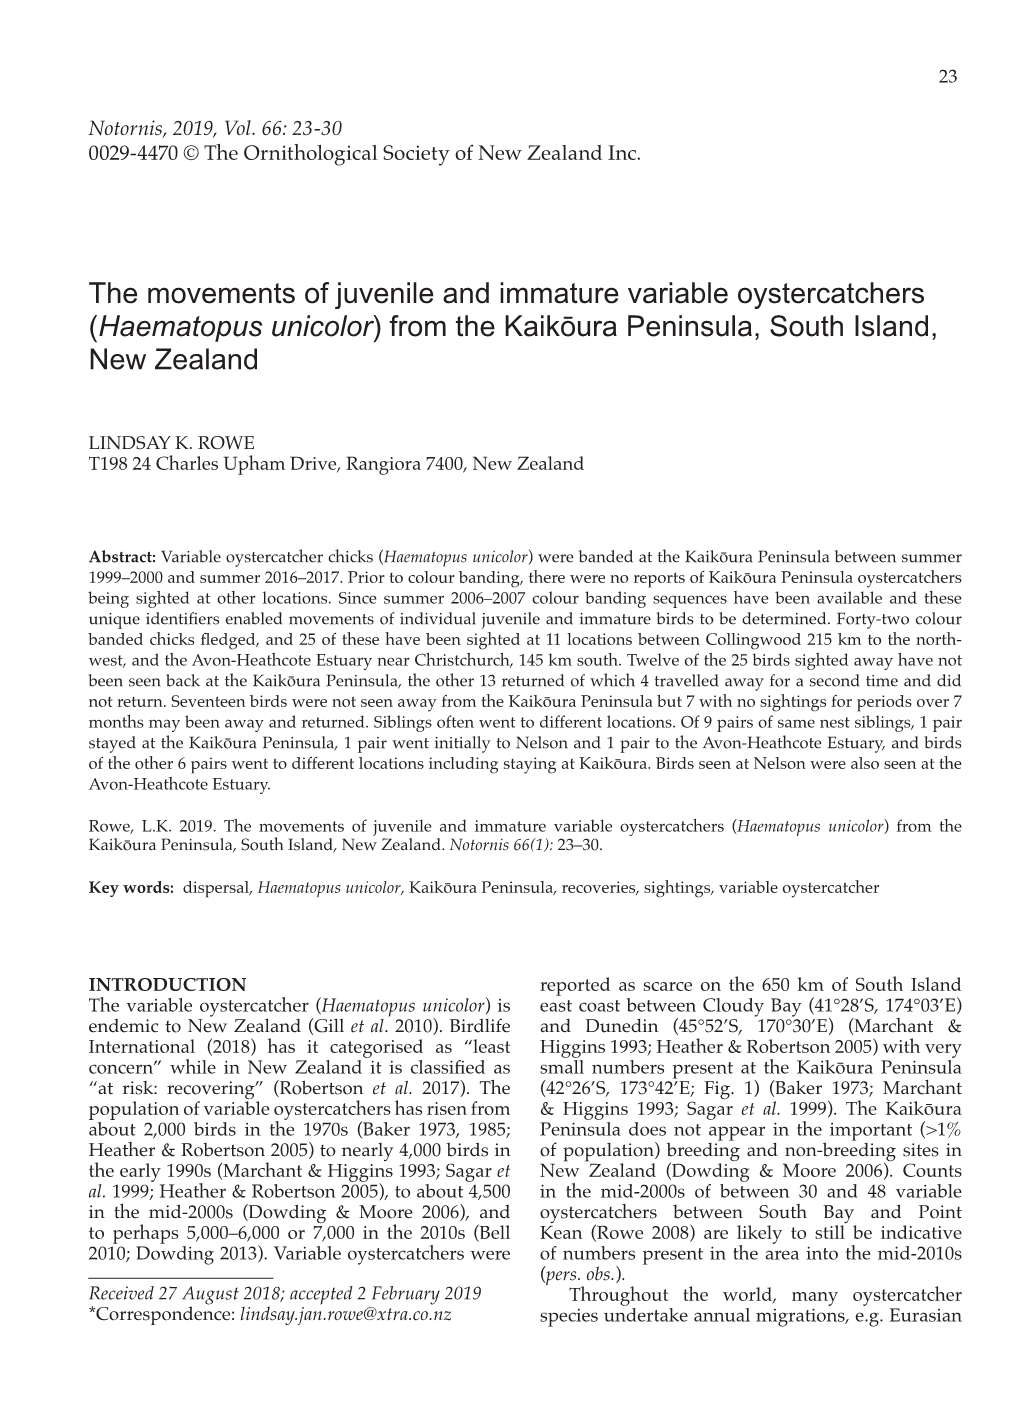 The Movements of Juvenile and Immature Variable Oystercatchers (Haematopus Unicolor) from the Kaikōura Peninsula, South Island, New Zealand